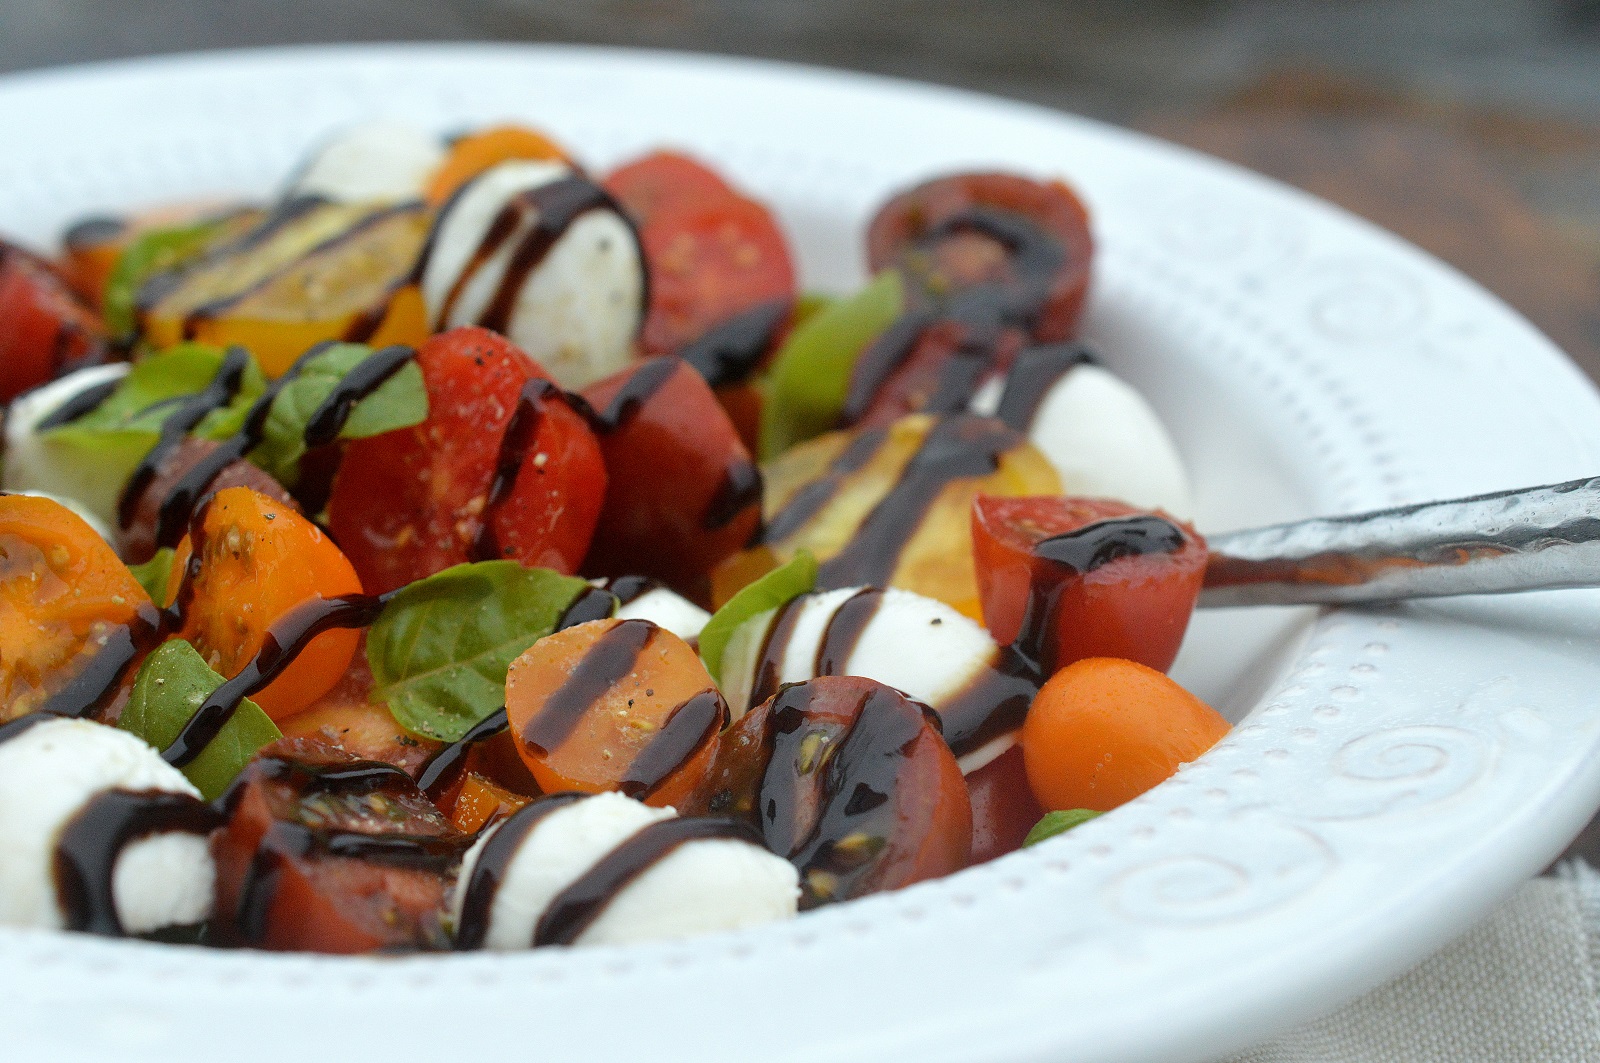 Liven up your Caprese Salad with colorful artisan or heirloom tomatoes